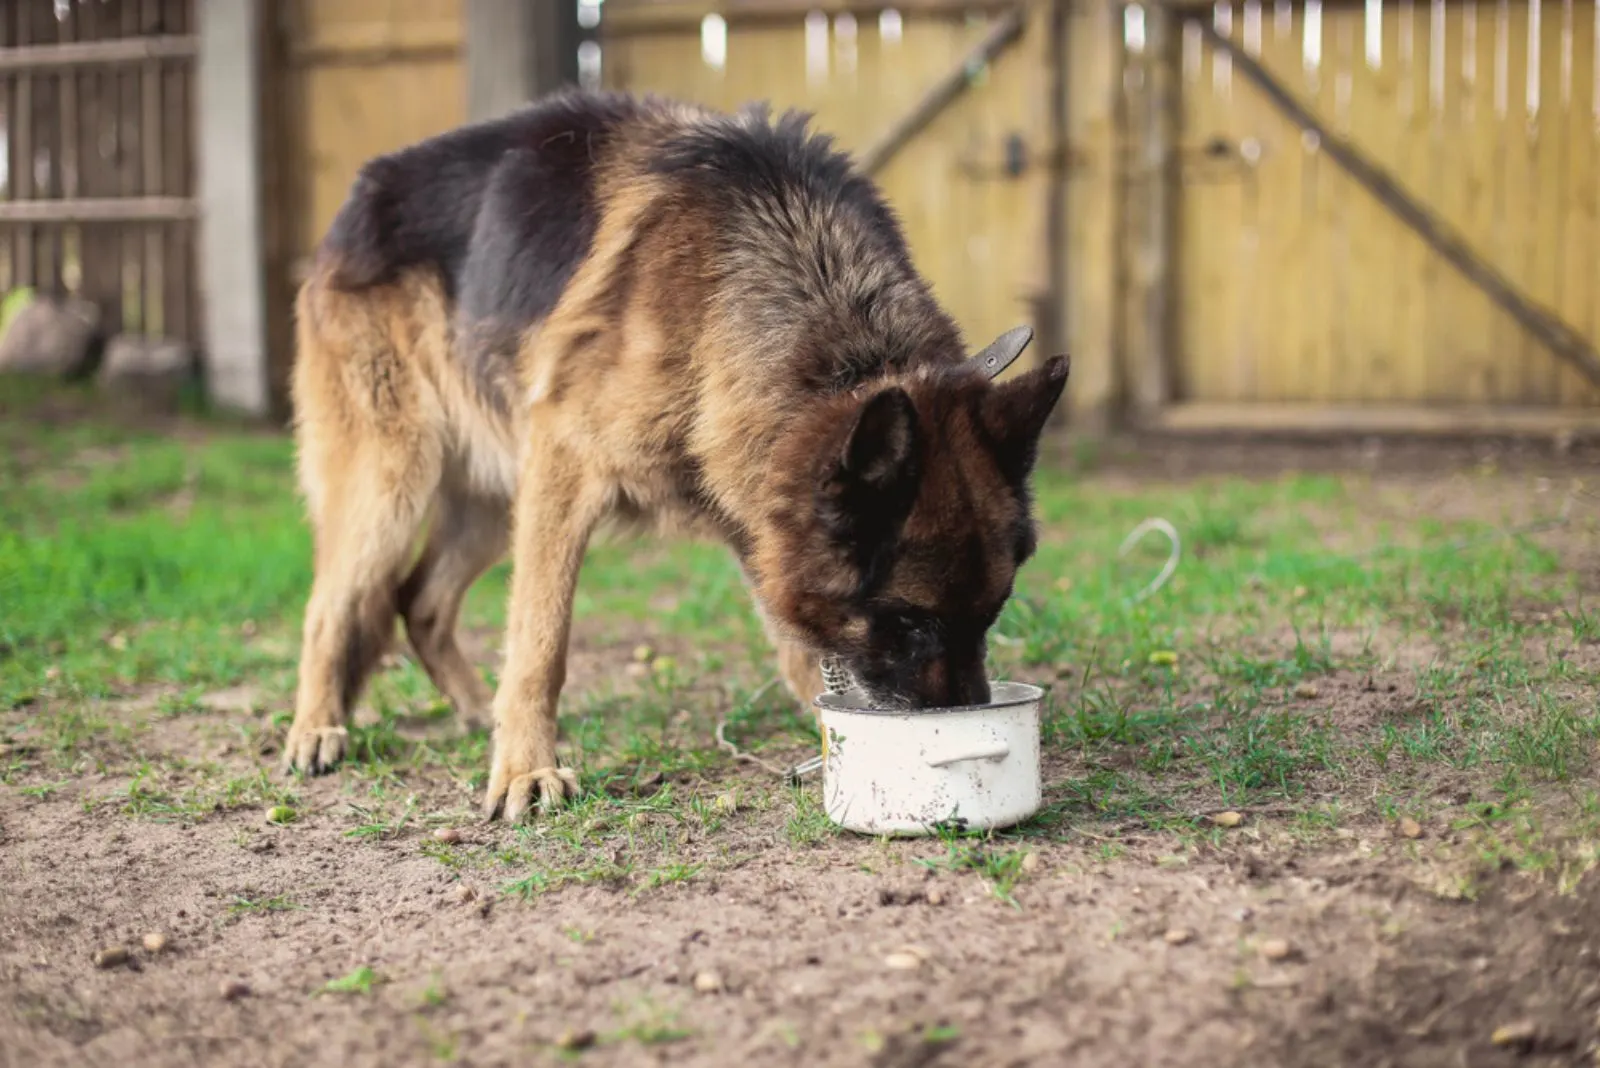 german shepherd dog eating from a bowl in the yard